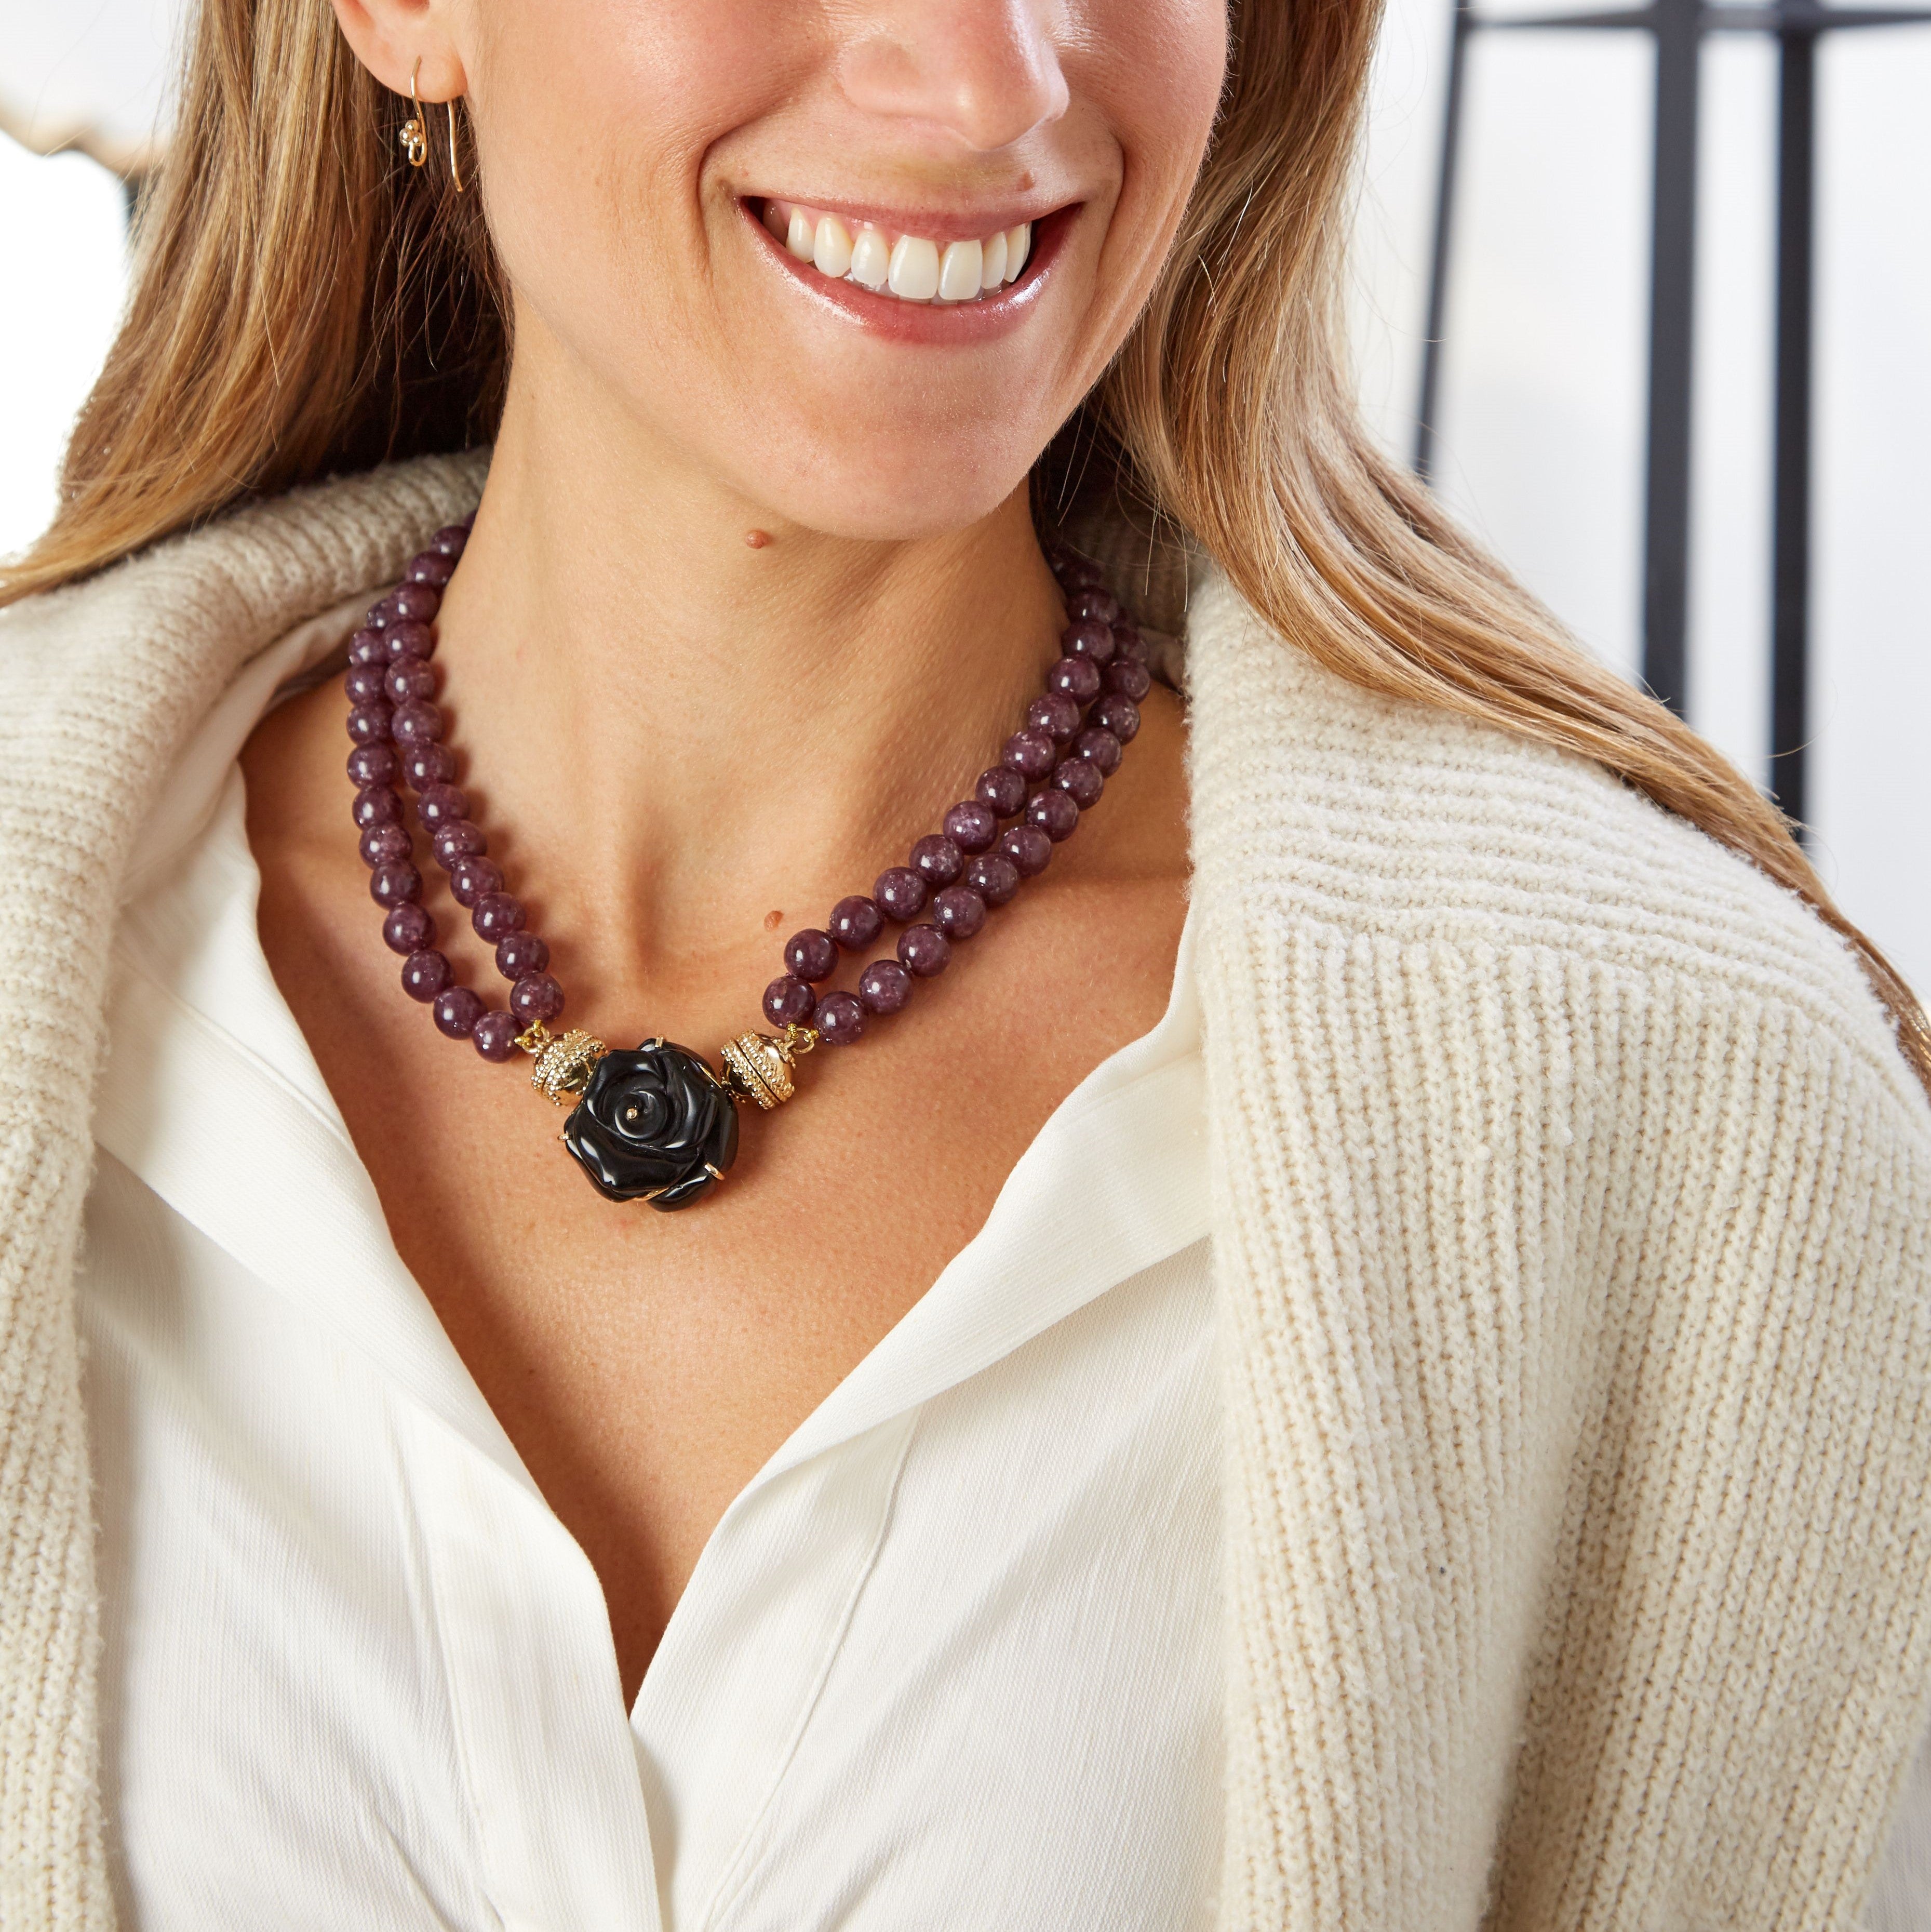 Victoire Lepidolite 10mm Double Strand Necklace